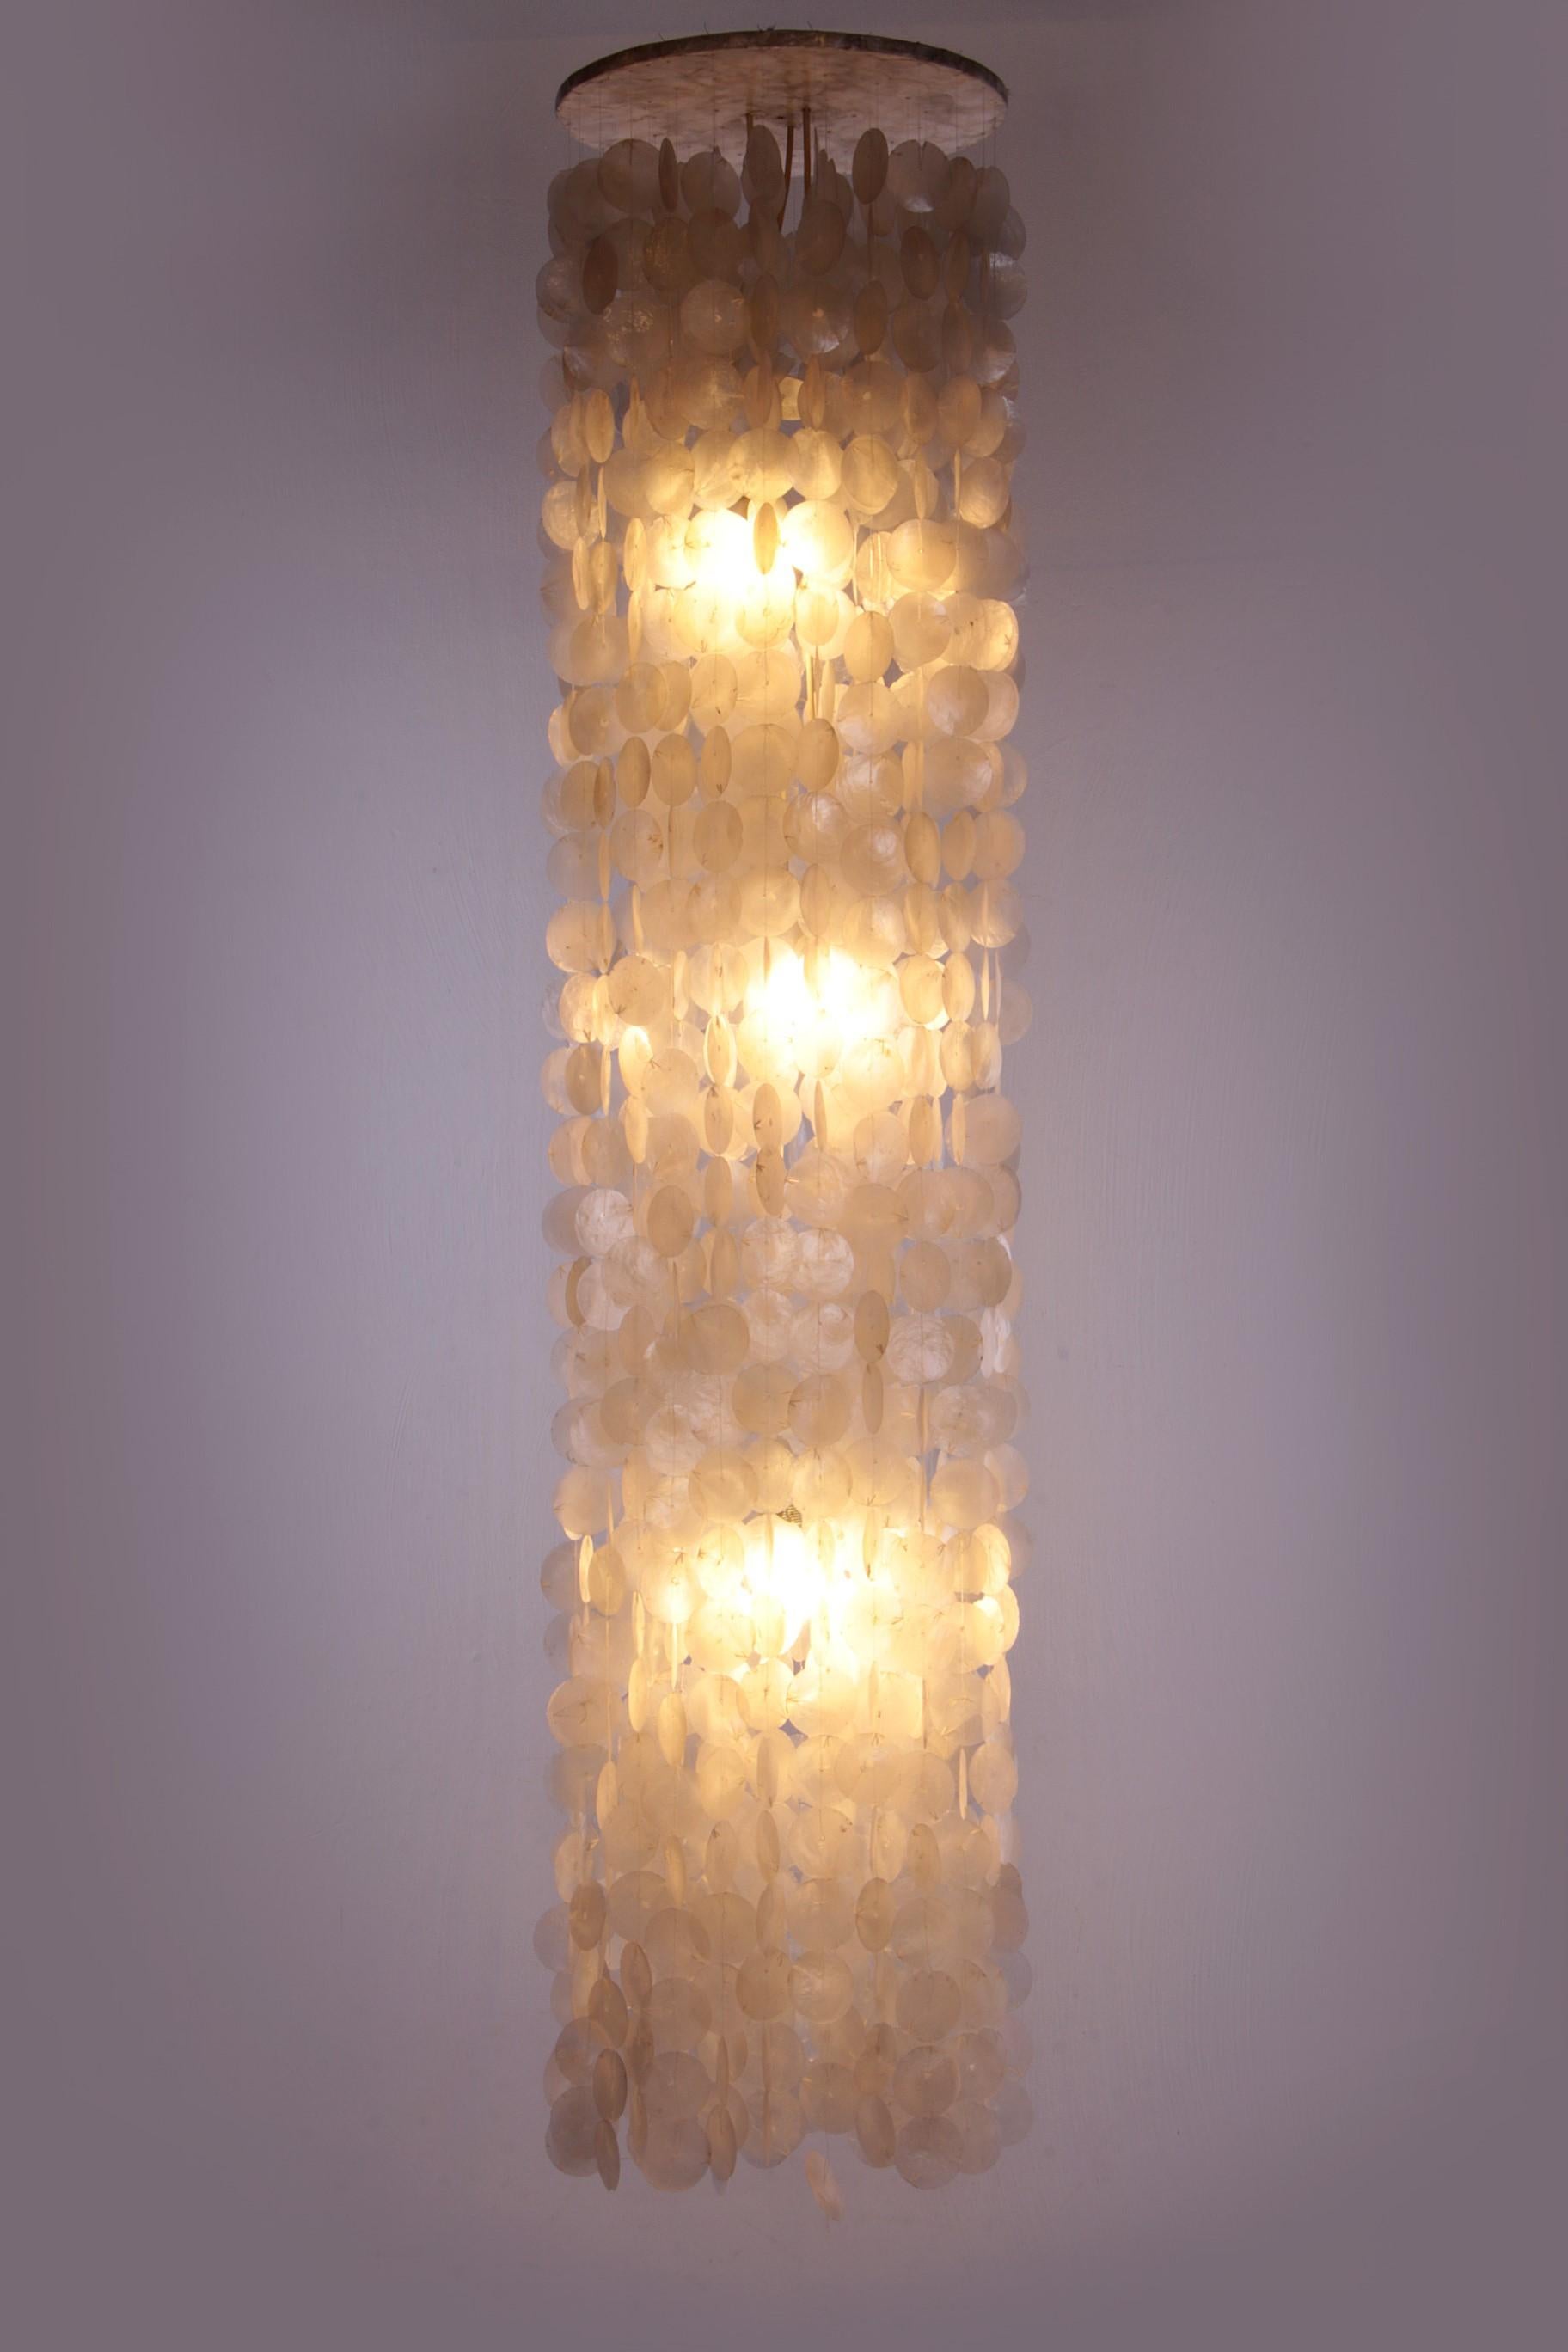 Vintage very long shell lamp Verner Panton,1964 Denmark.


An impressive 2-meter long shell pendant lamp designed by Verner Panton for the Swiss manufacturer J. Luber Ag.

An original vintage piece manufactured in the mid-century, (60s and